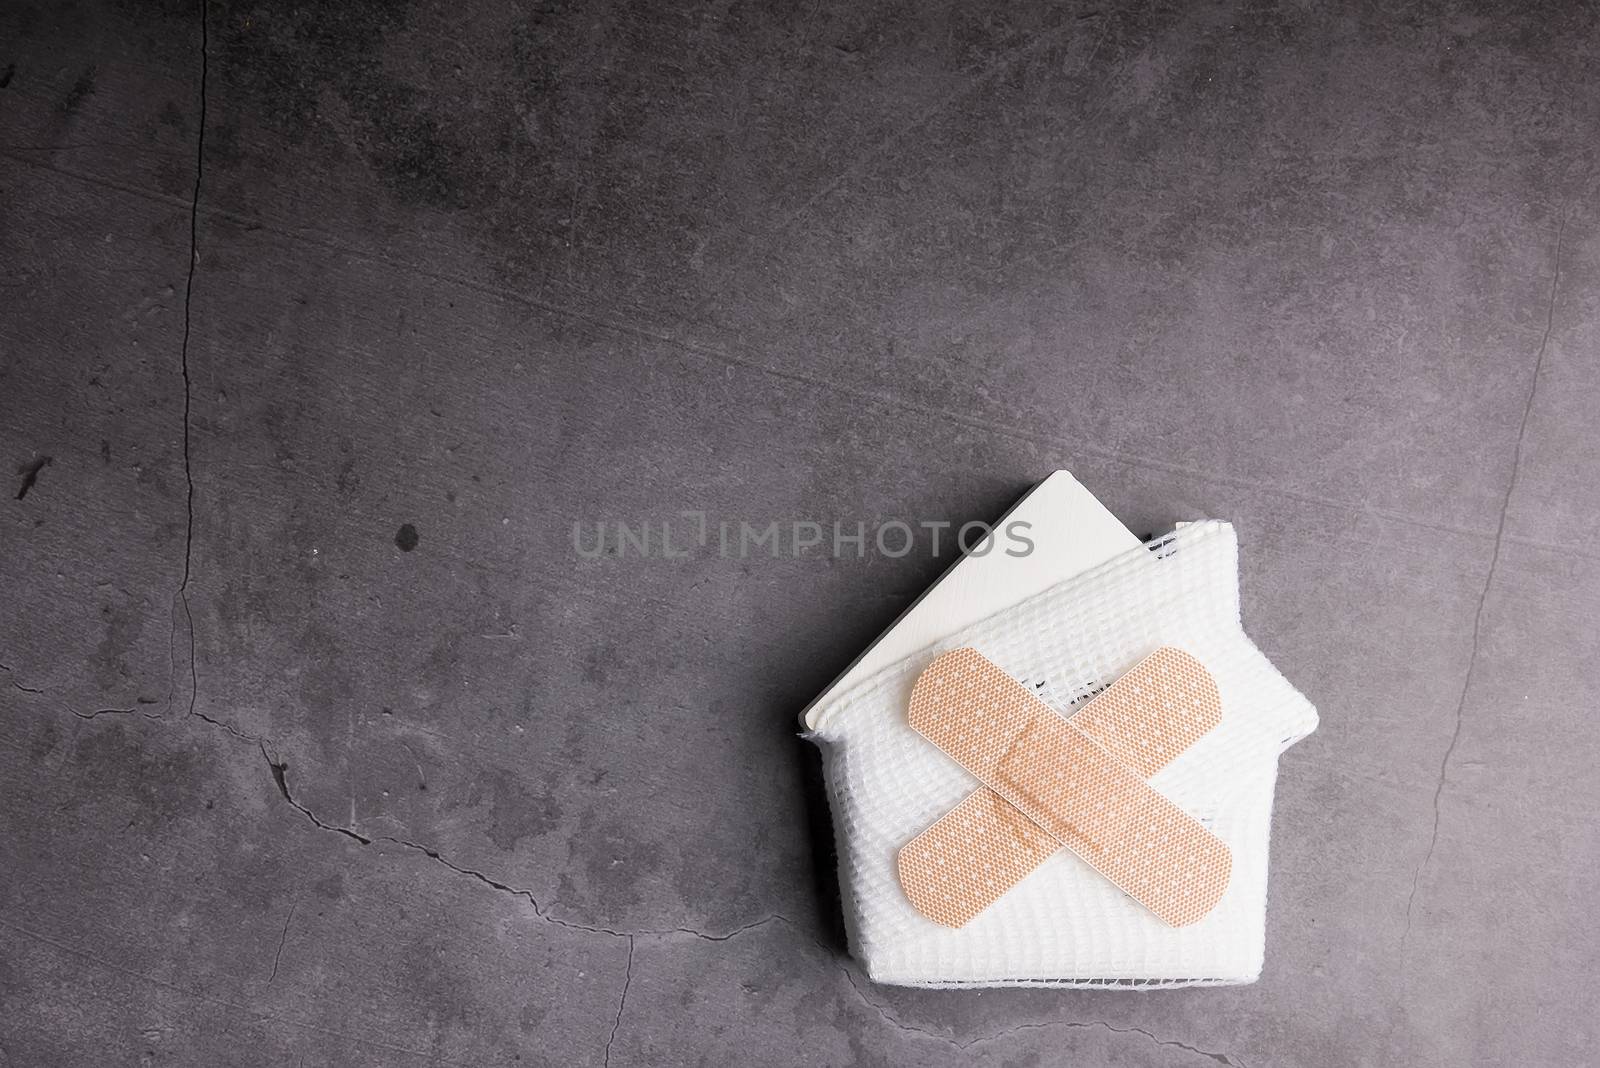 Wooden model white houses and first aid equipment on a cement gray background. Concept home repair, Home improvement, Renovate home.